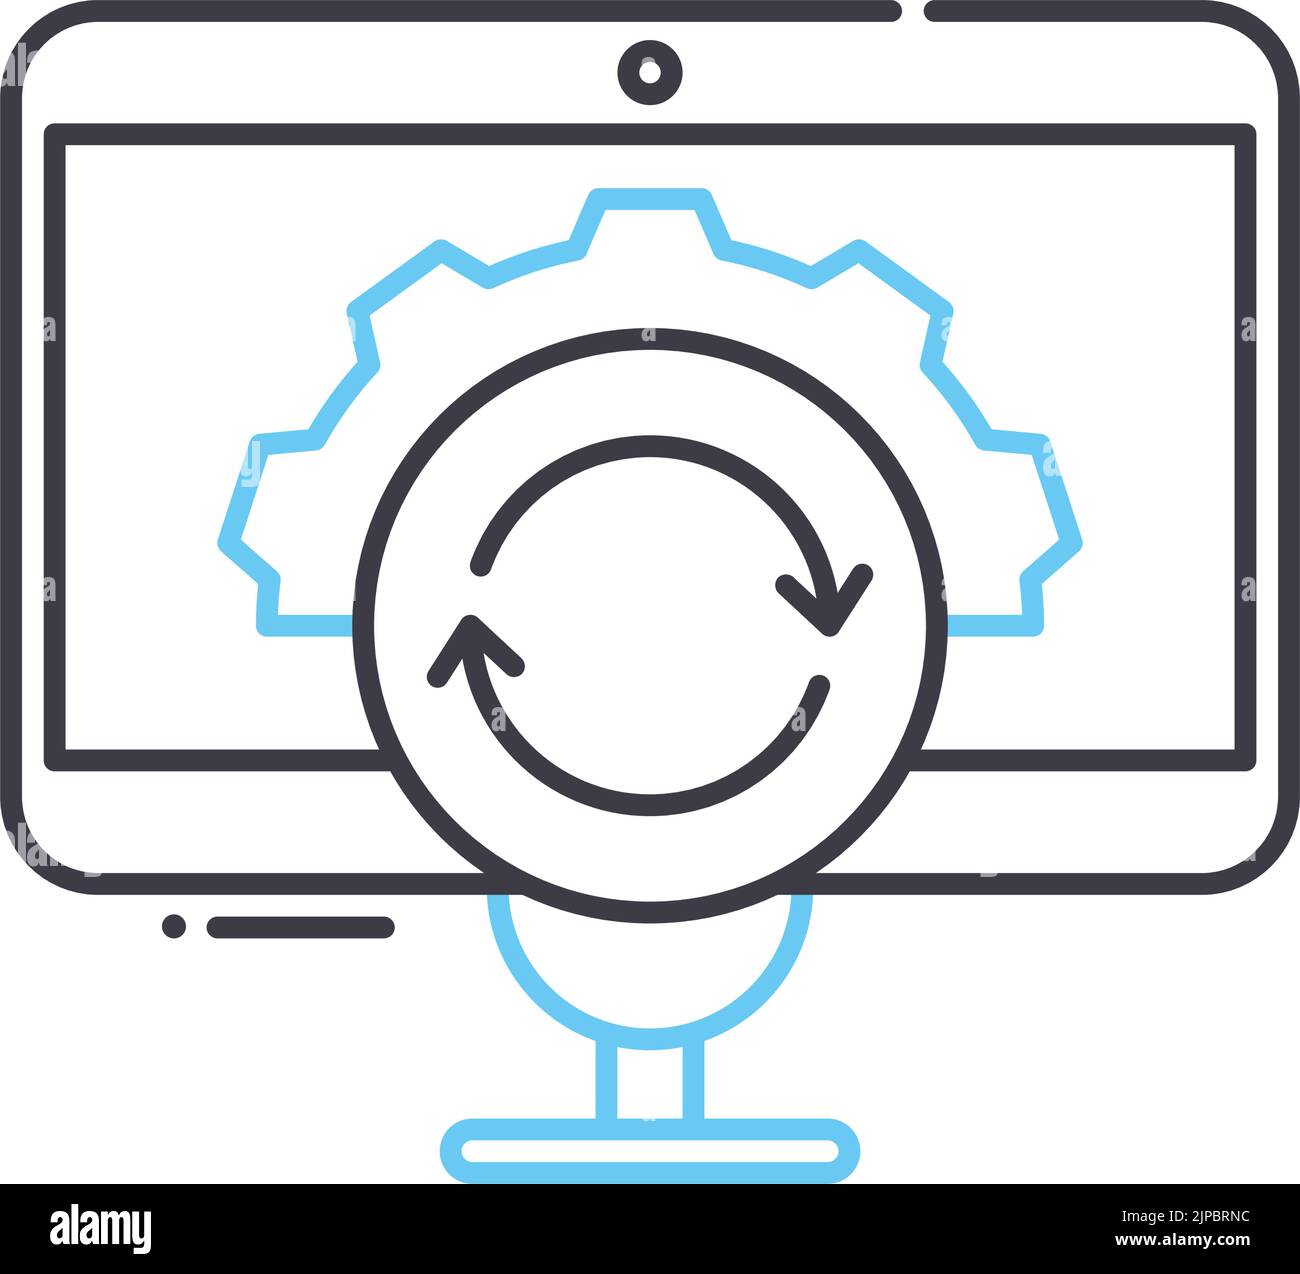 operational technology line icon, outline symbol, vector illustration, concept sign Stock Vector